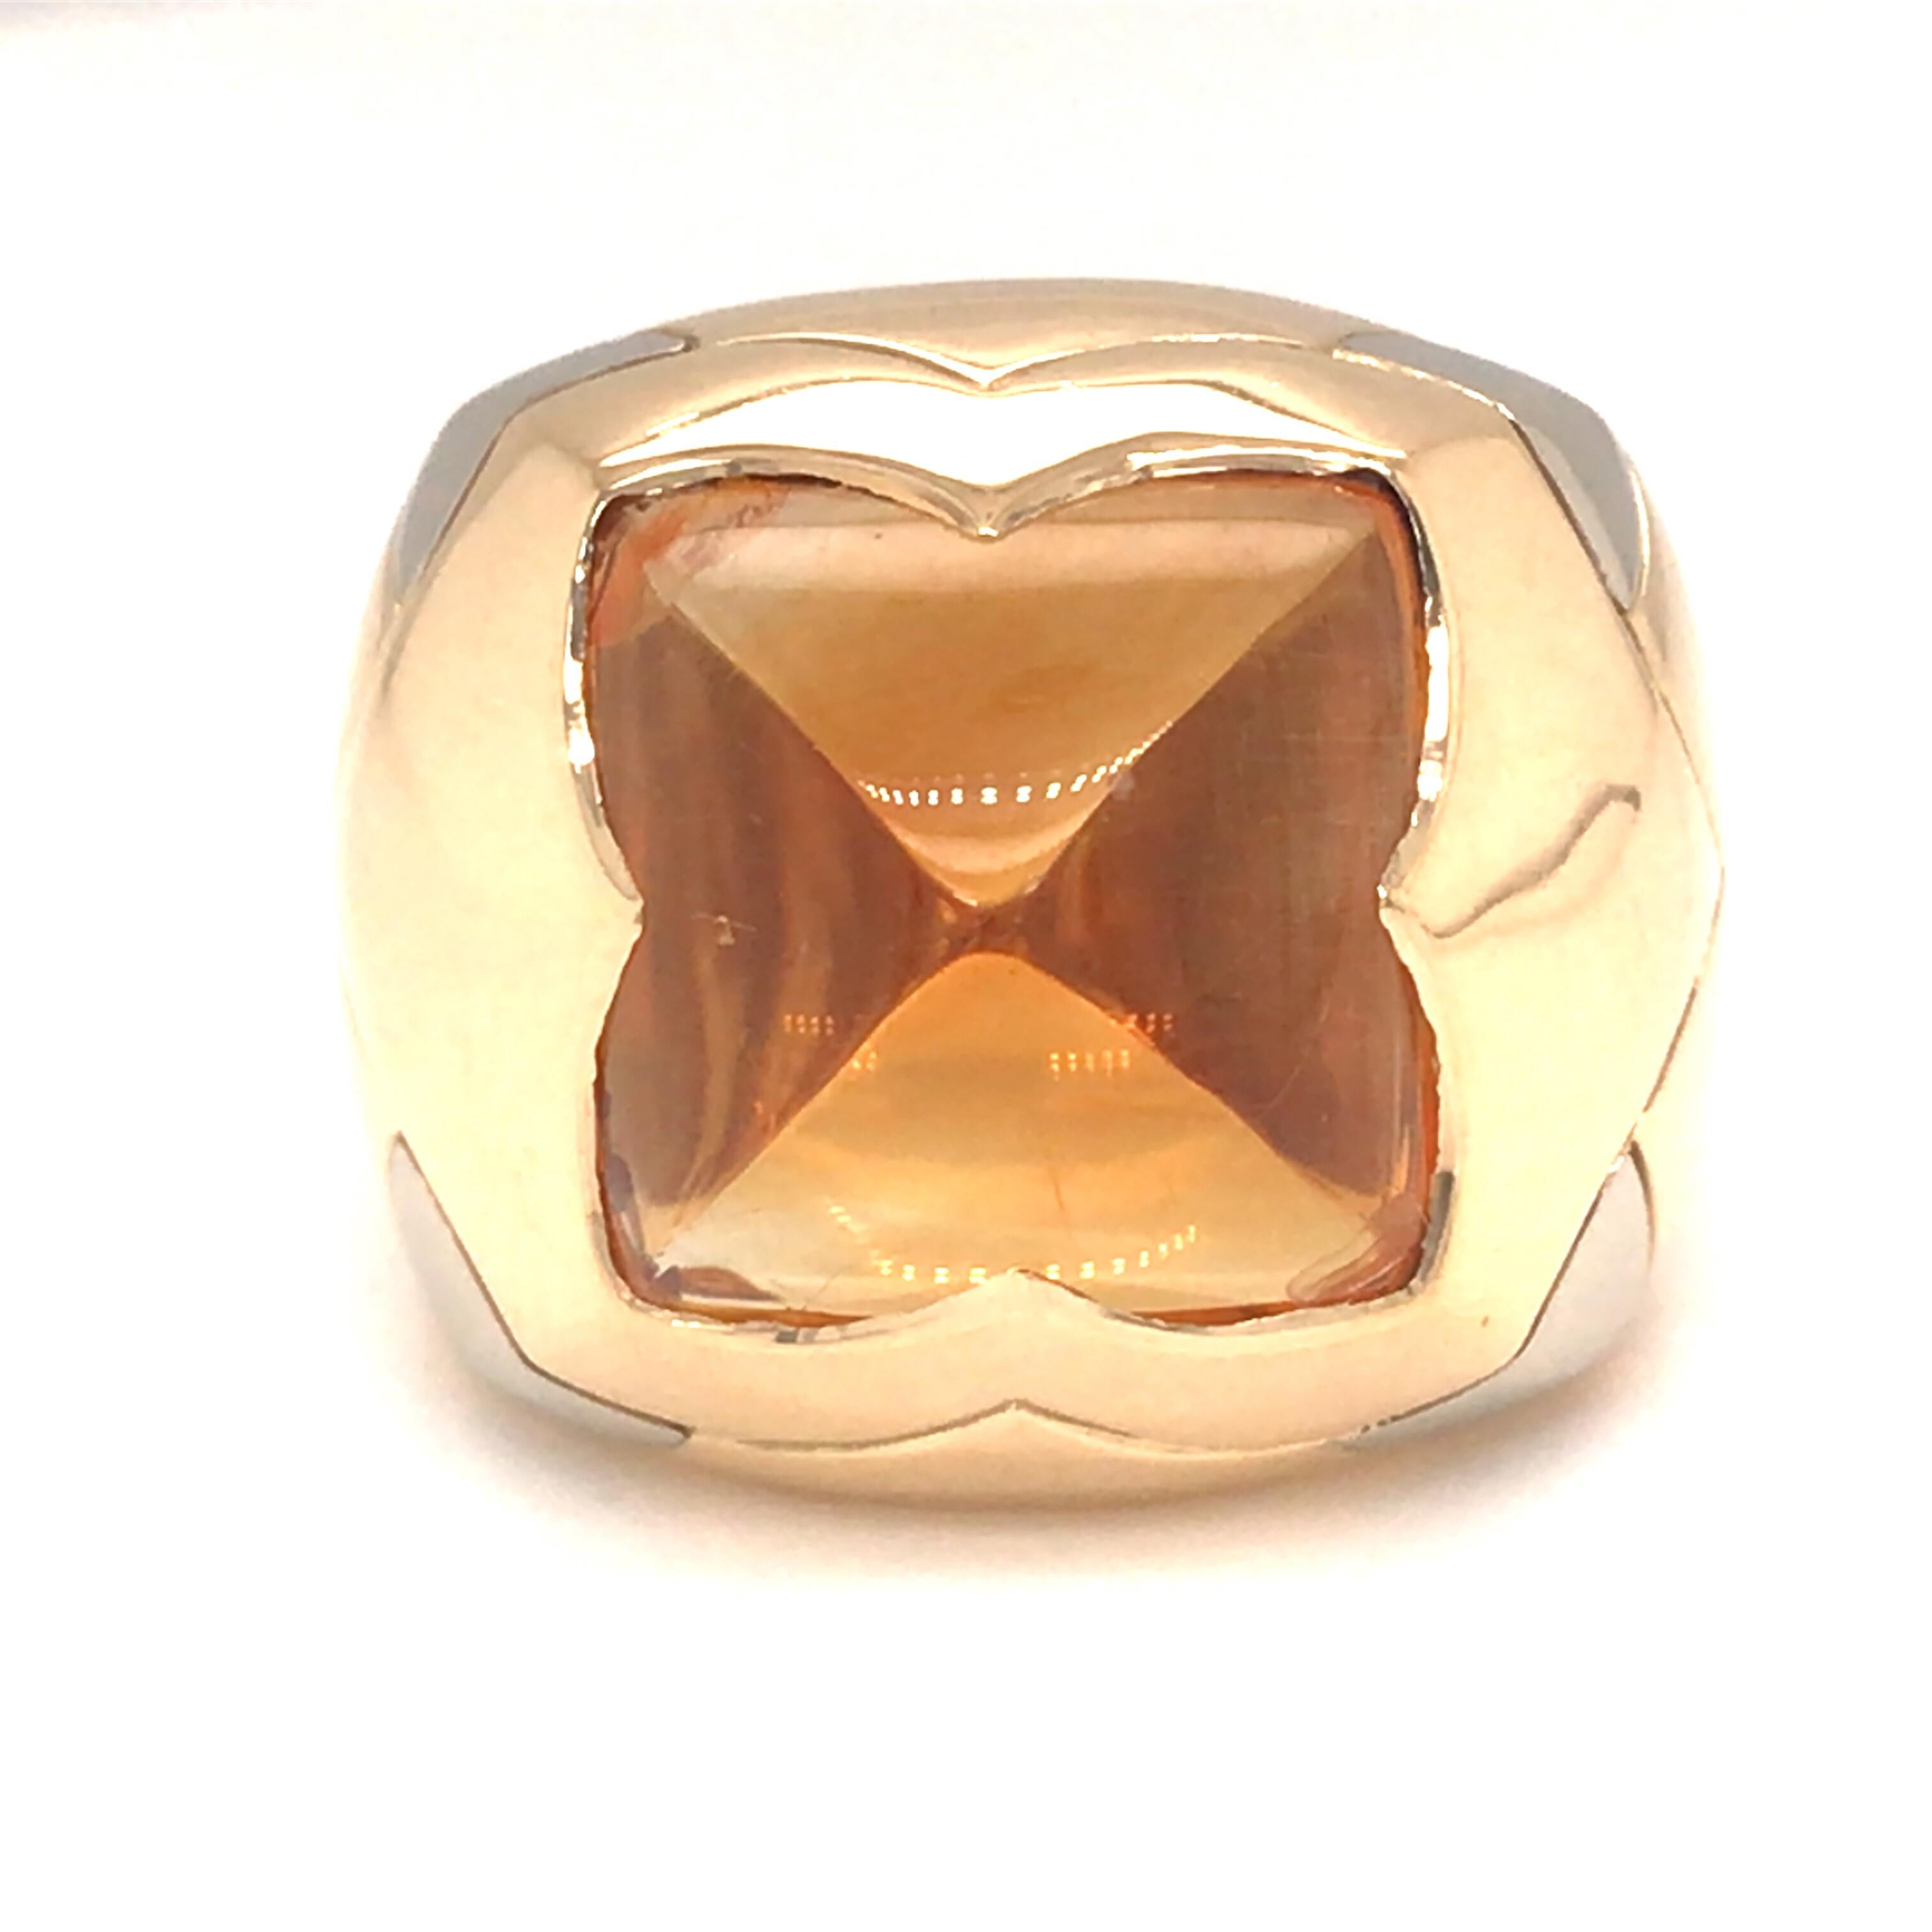 BVLGARI Pyramid Ring in 18K Yellow Gold.  The Ring measures 3/4 inch in width.  Stamped. Ring size 6 3/4.  BVLGARI 25-6-99 750 *159 ROMA.  15.70 grams.